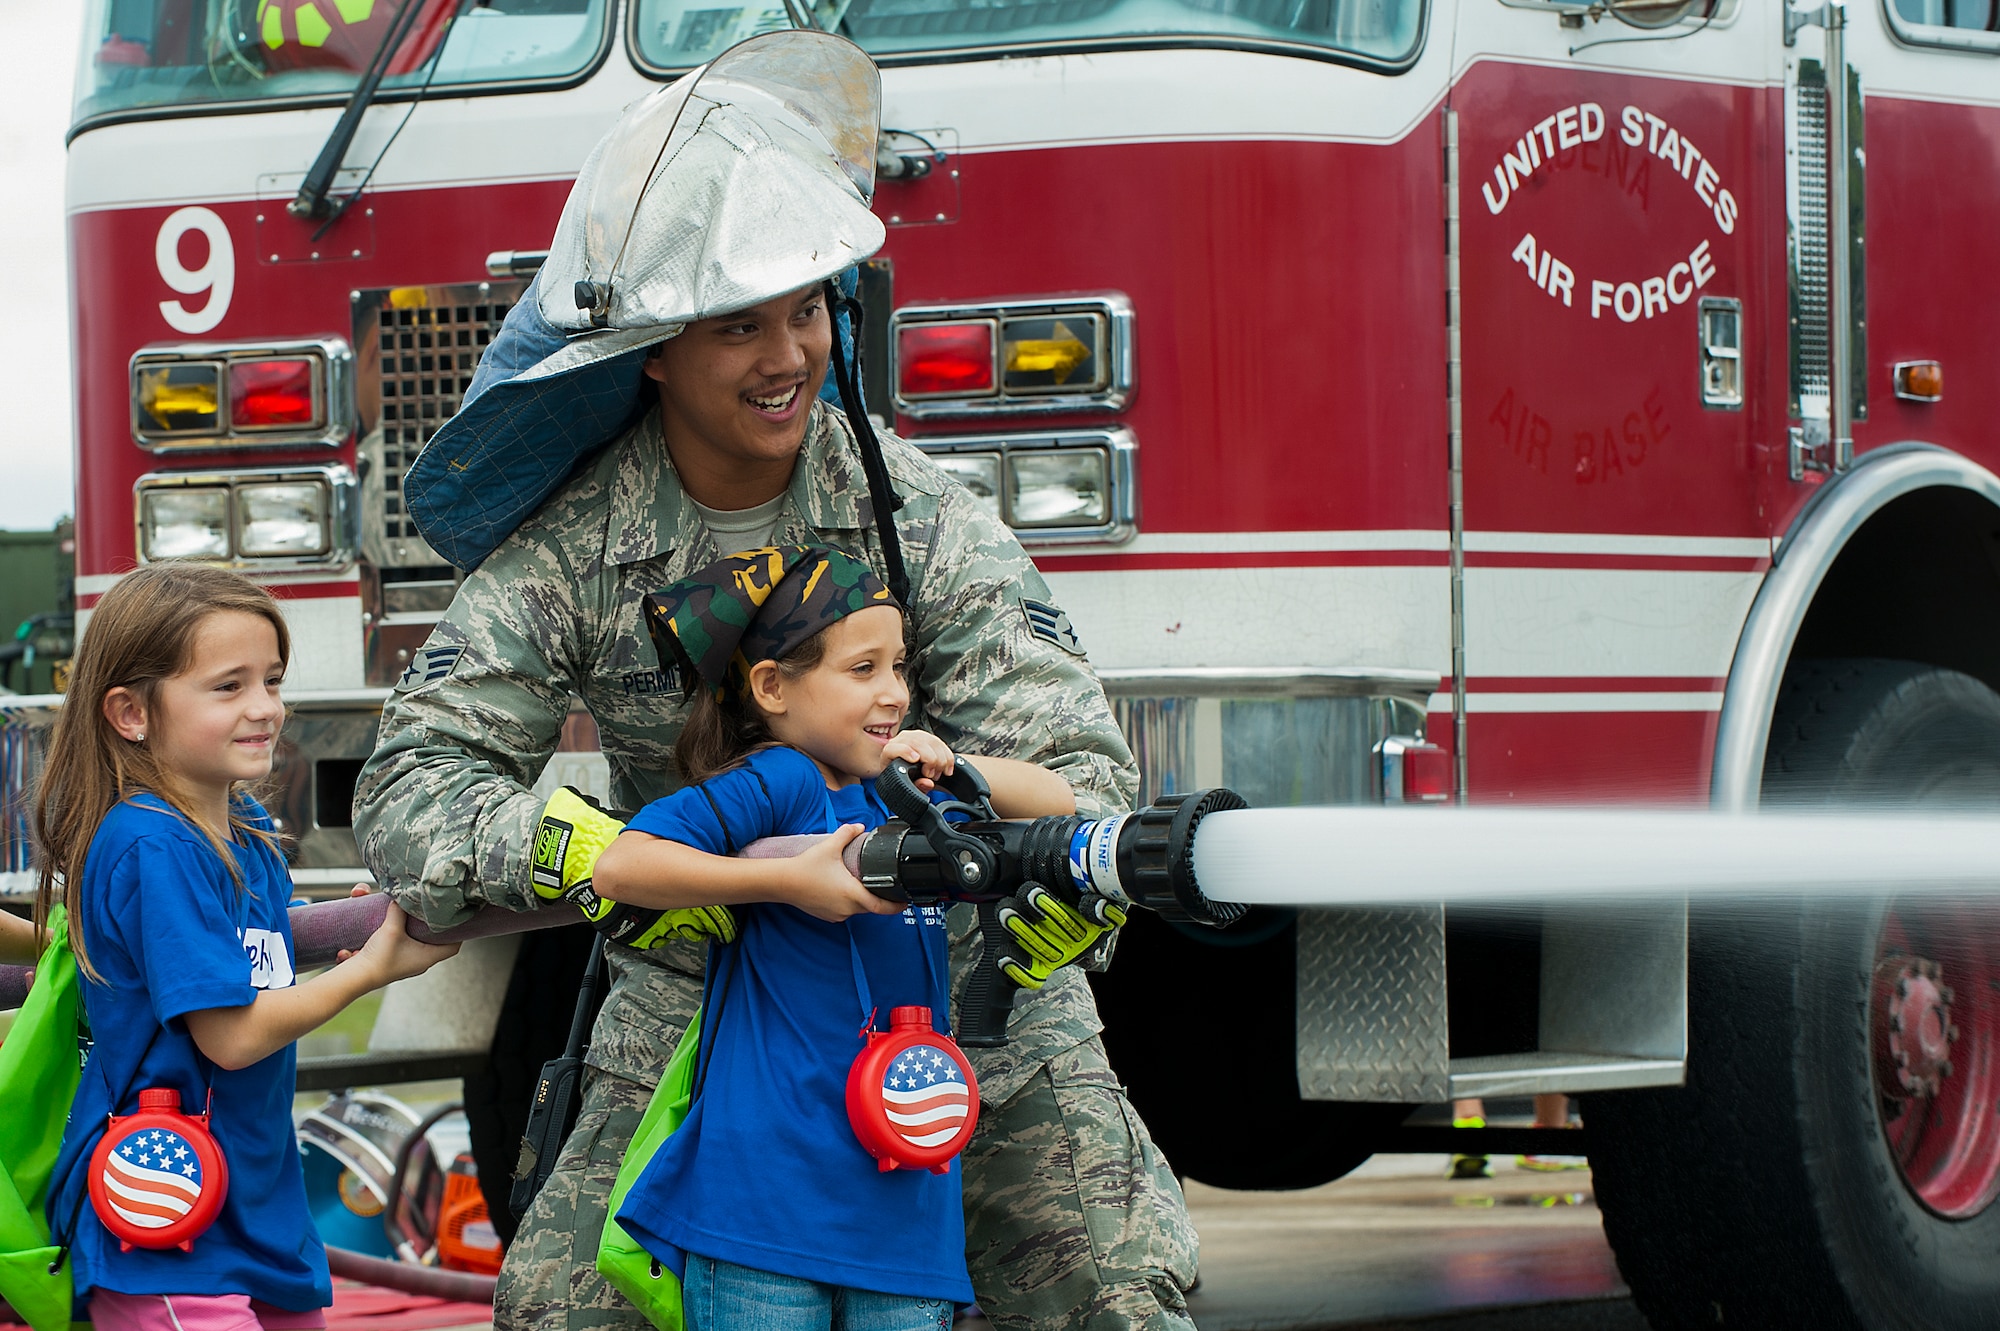 U.S. Air Force Staff Sgt. Darren Harris, 18th Security Forces Squadron, shows children how the radio on the patrol car works at Skoshi Warrior Nov. 14, 2015, at Kadena Air Base, Japan. More than 200 children participated in this annual event, meant to show children their parents’ deployment process and to see different aspects of military jobs. (U.S. Air Force photo by Airman 1st Class Corey M. Pettis)   